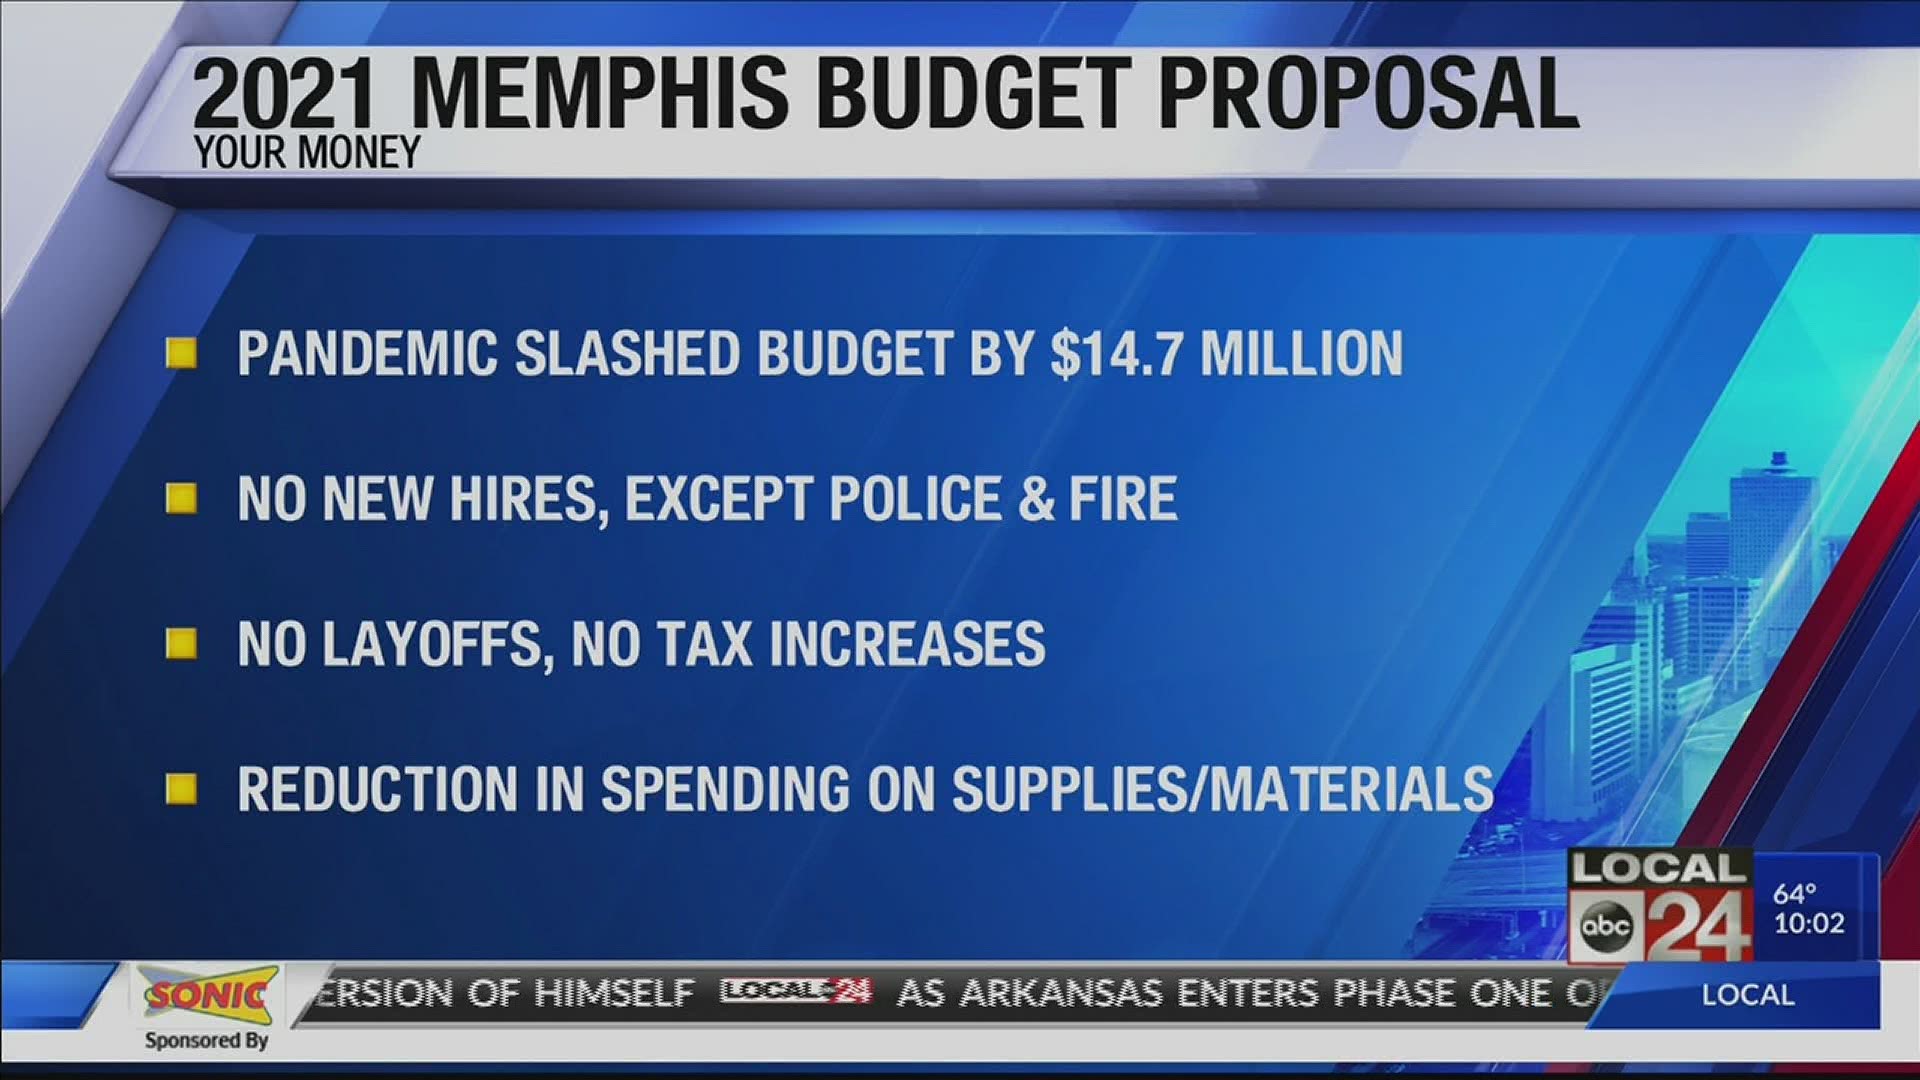 Mayor Strickland's 2021 budget proposal promises no tax increase or layoffs, even with economic devastation caused by coronavirus pandemic